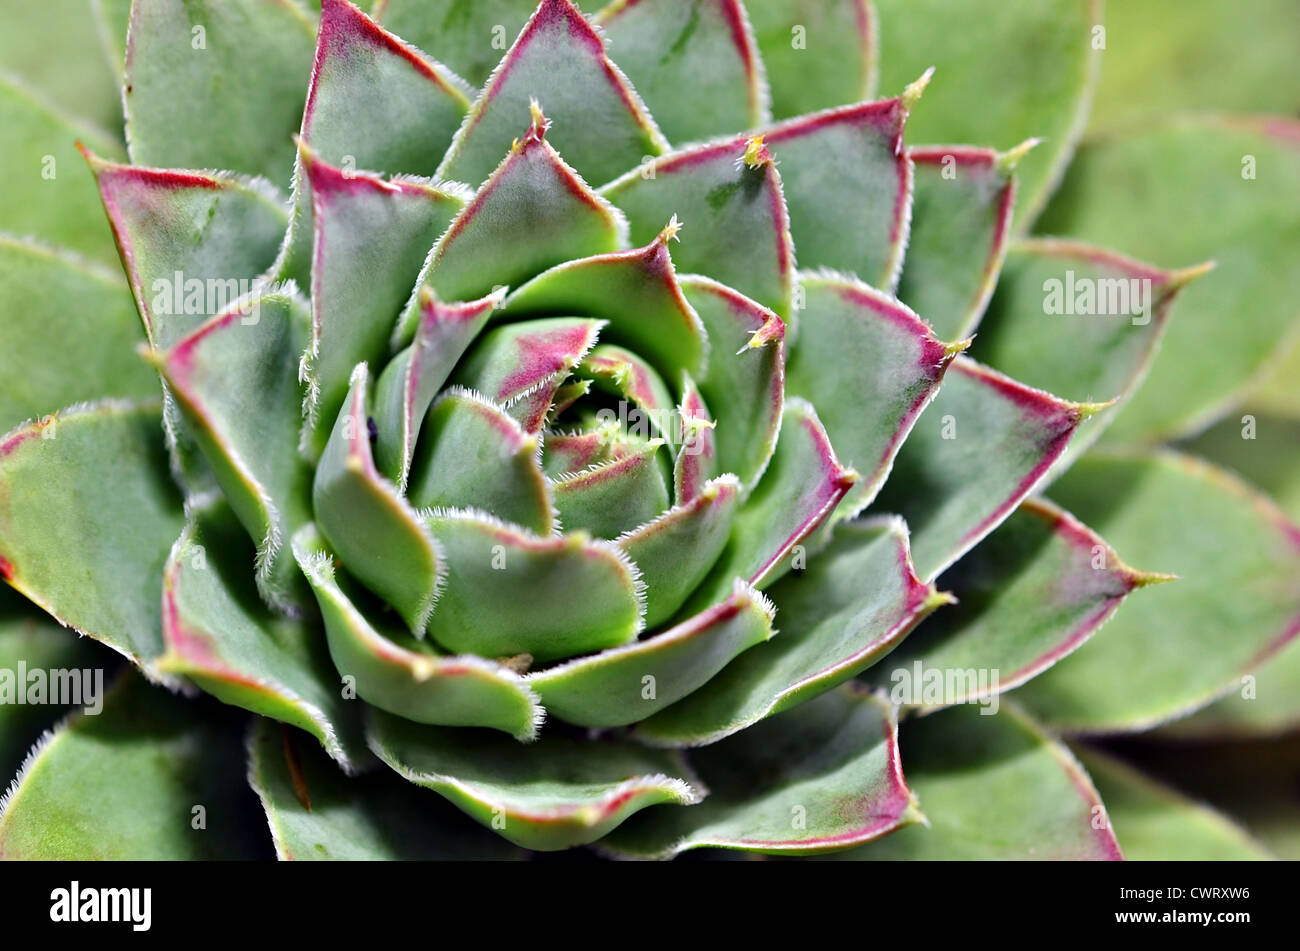 A green succulent plant with red edges. Stock Photo